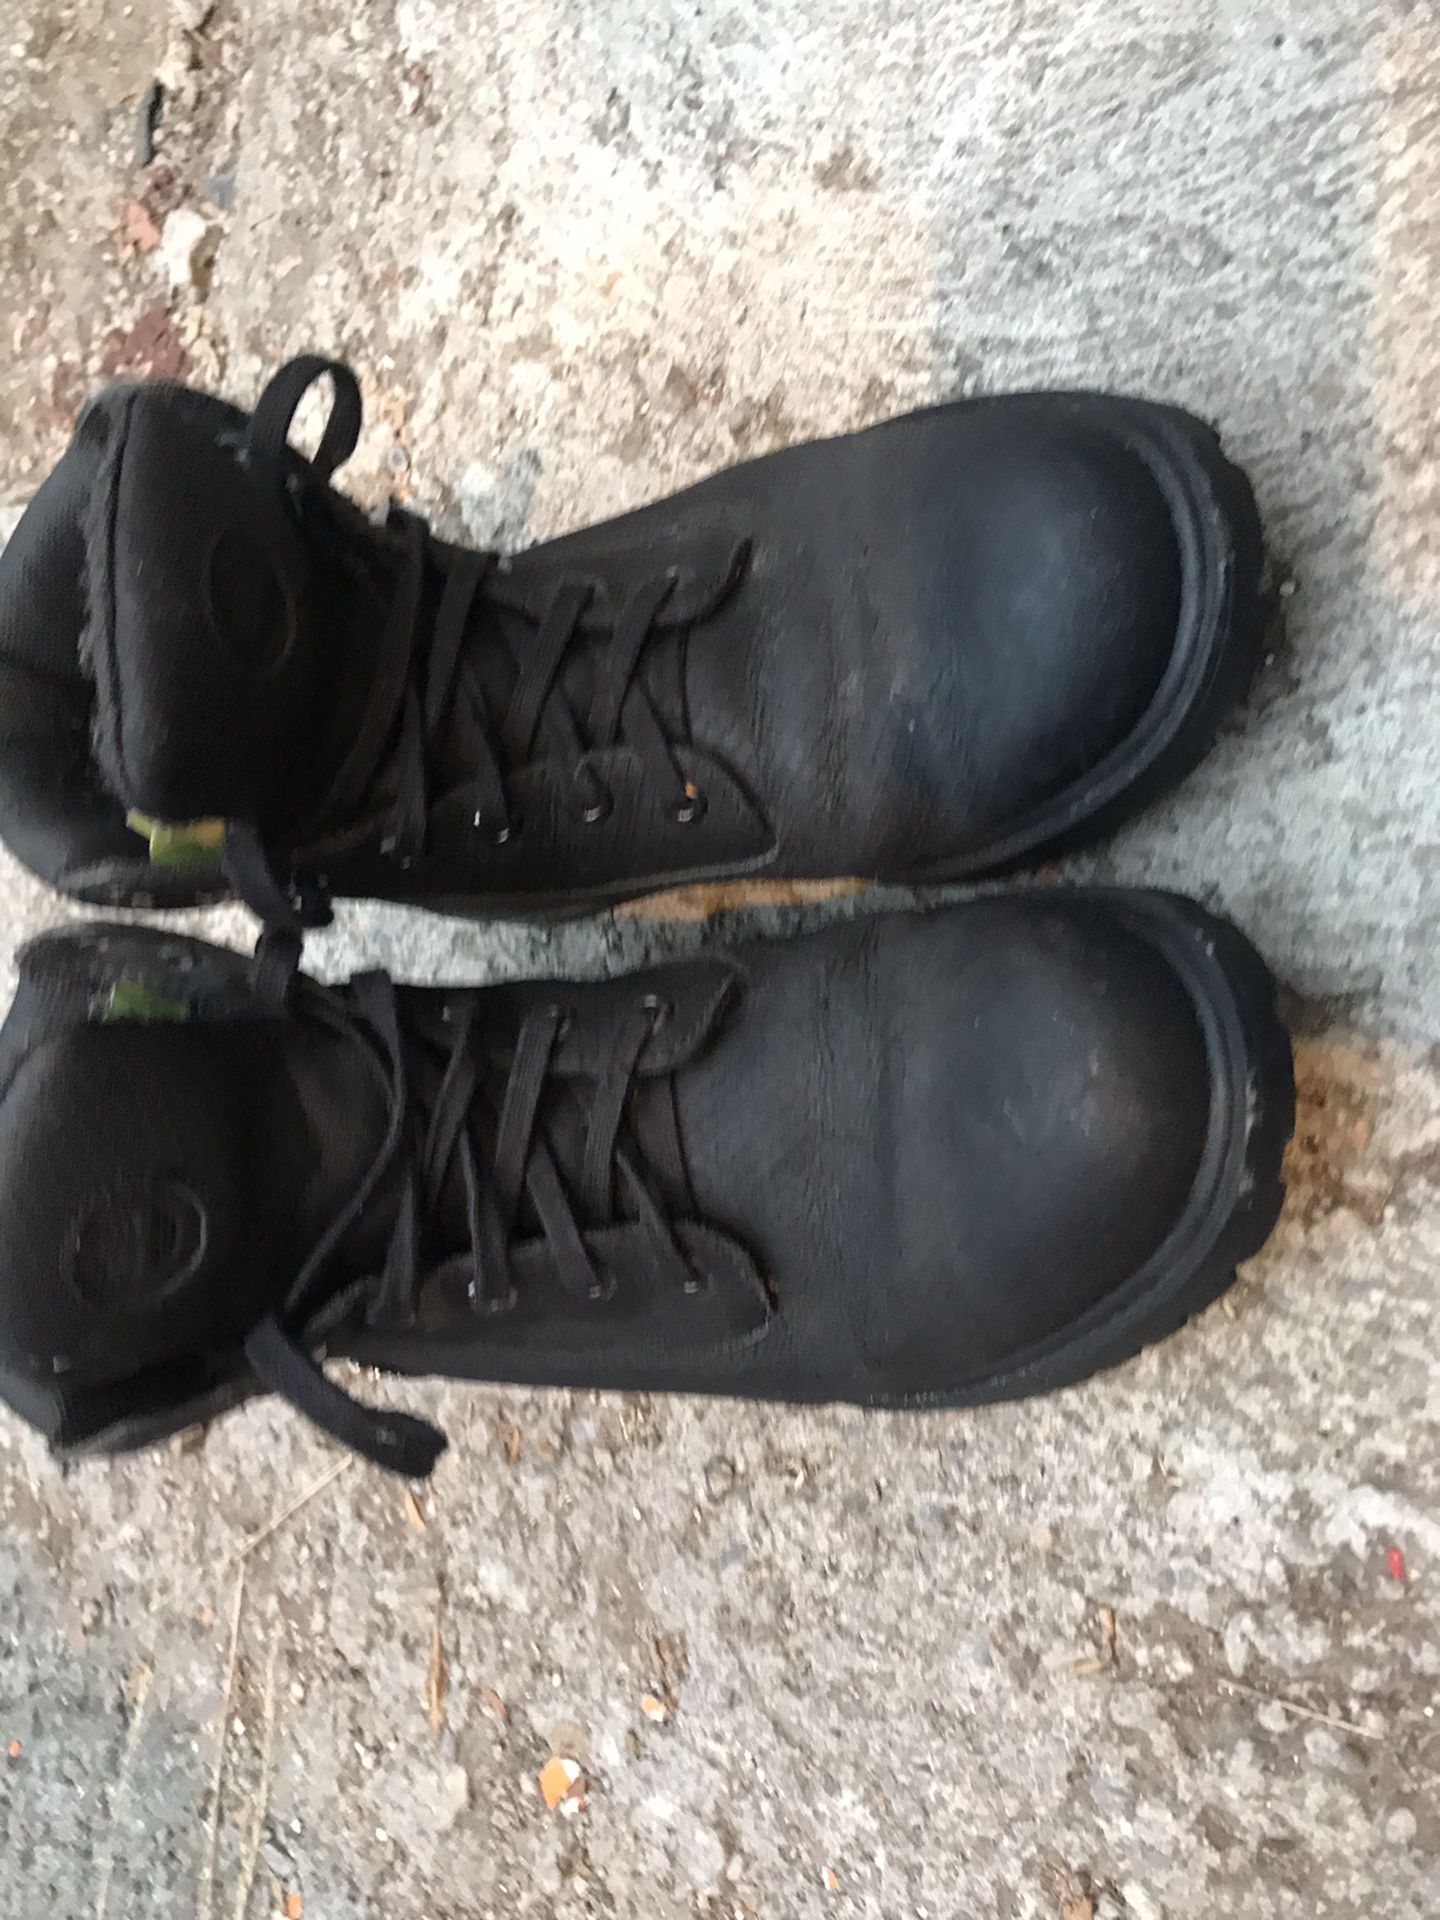 Men’s Helcor Timberland boots size 9